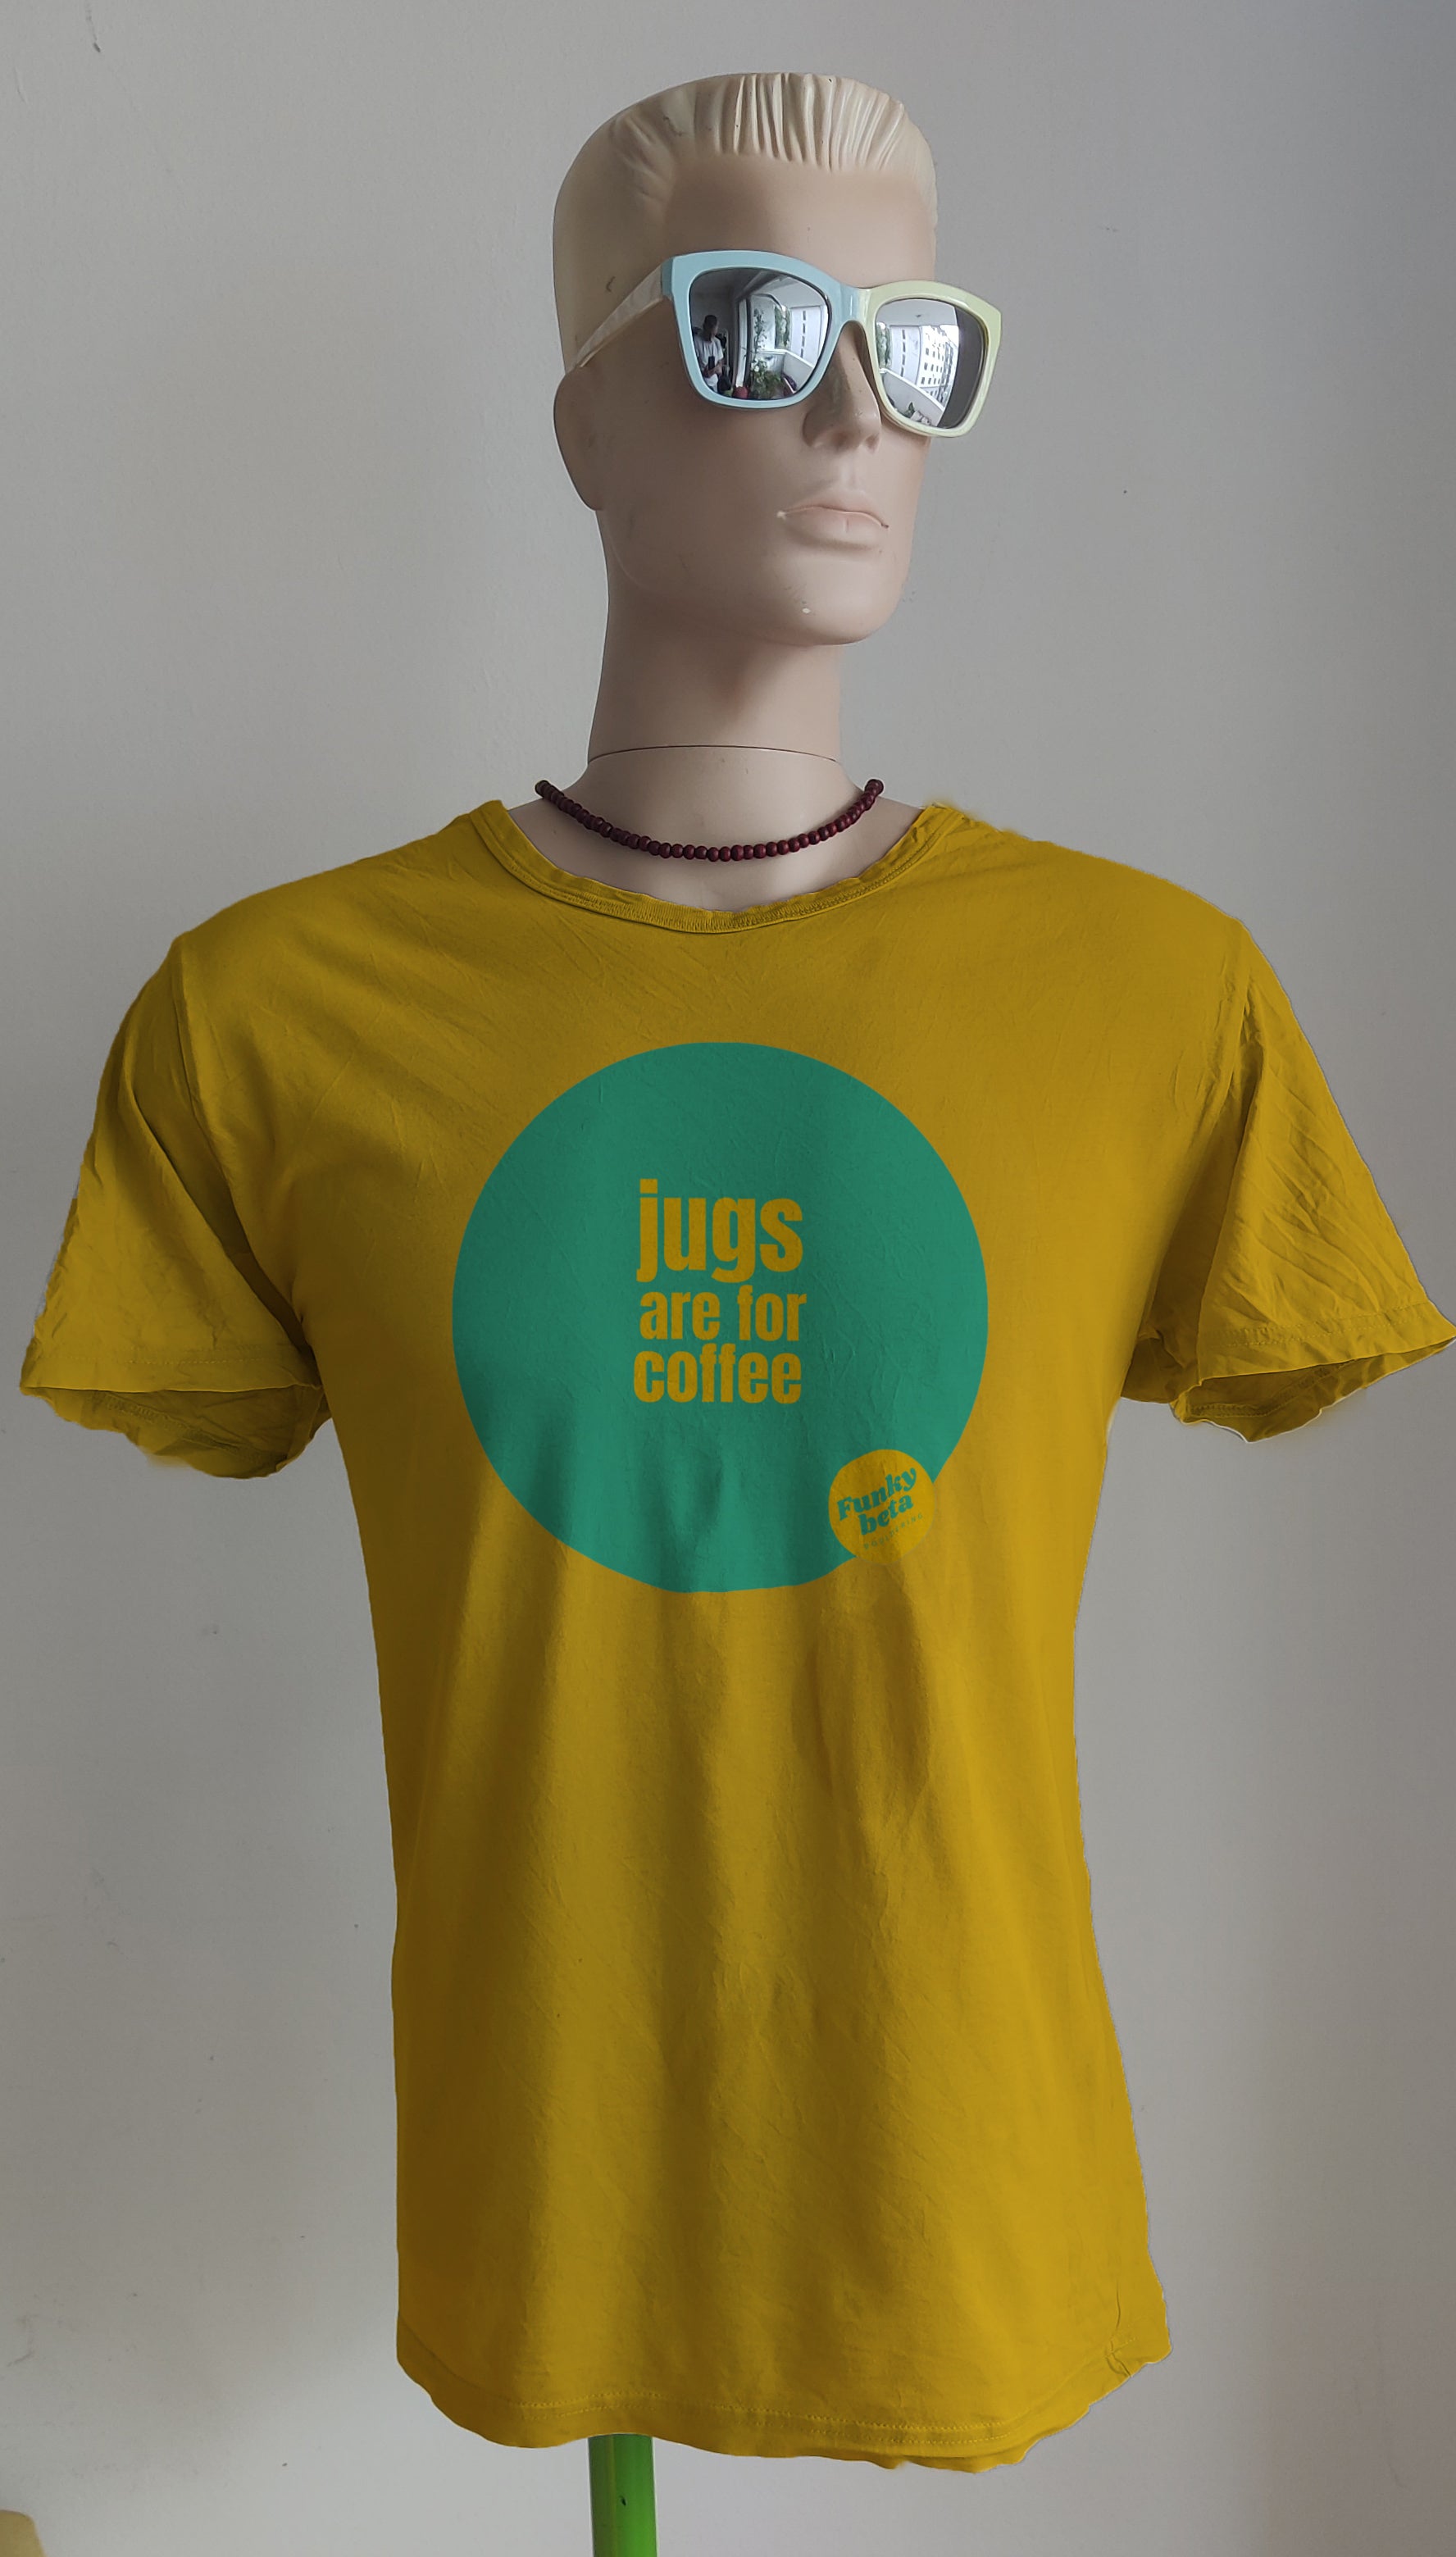 Jugs Are for Coffee - Climbing T-Shirt by FunkyBeta Bouldering